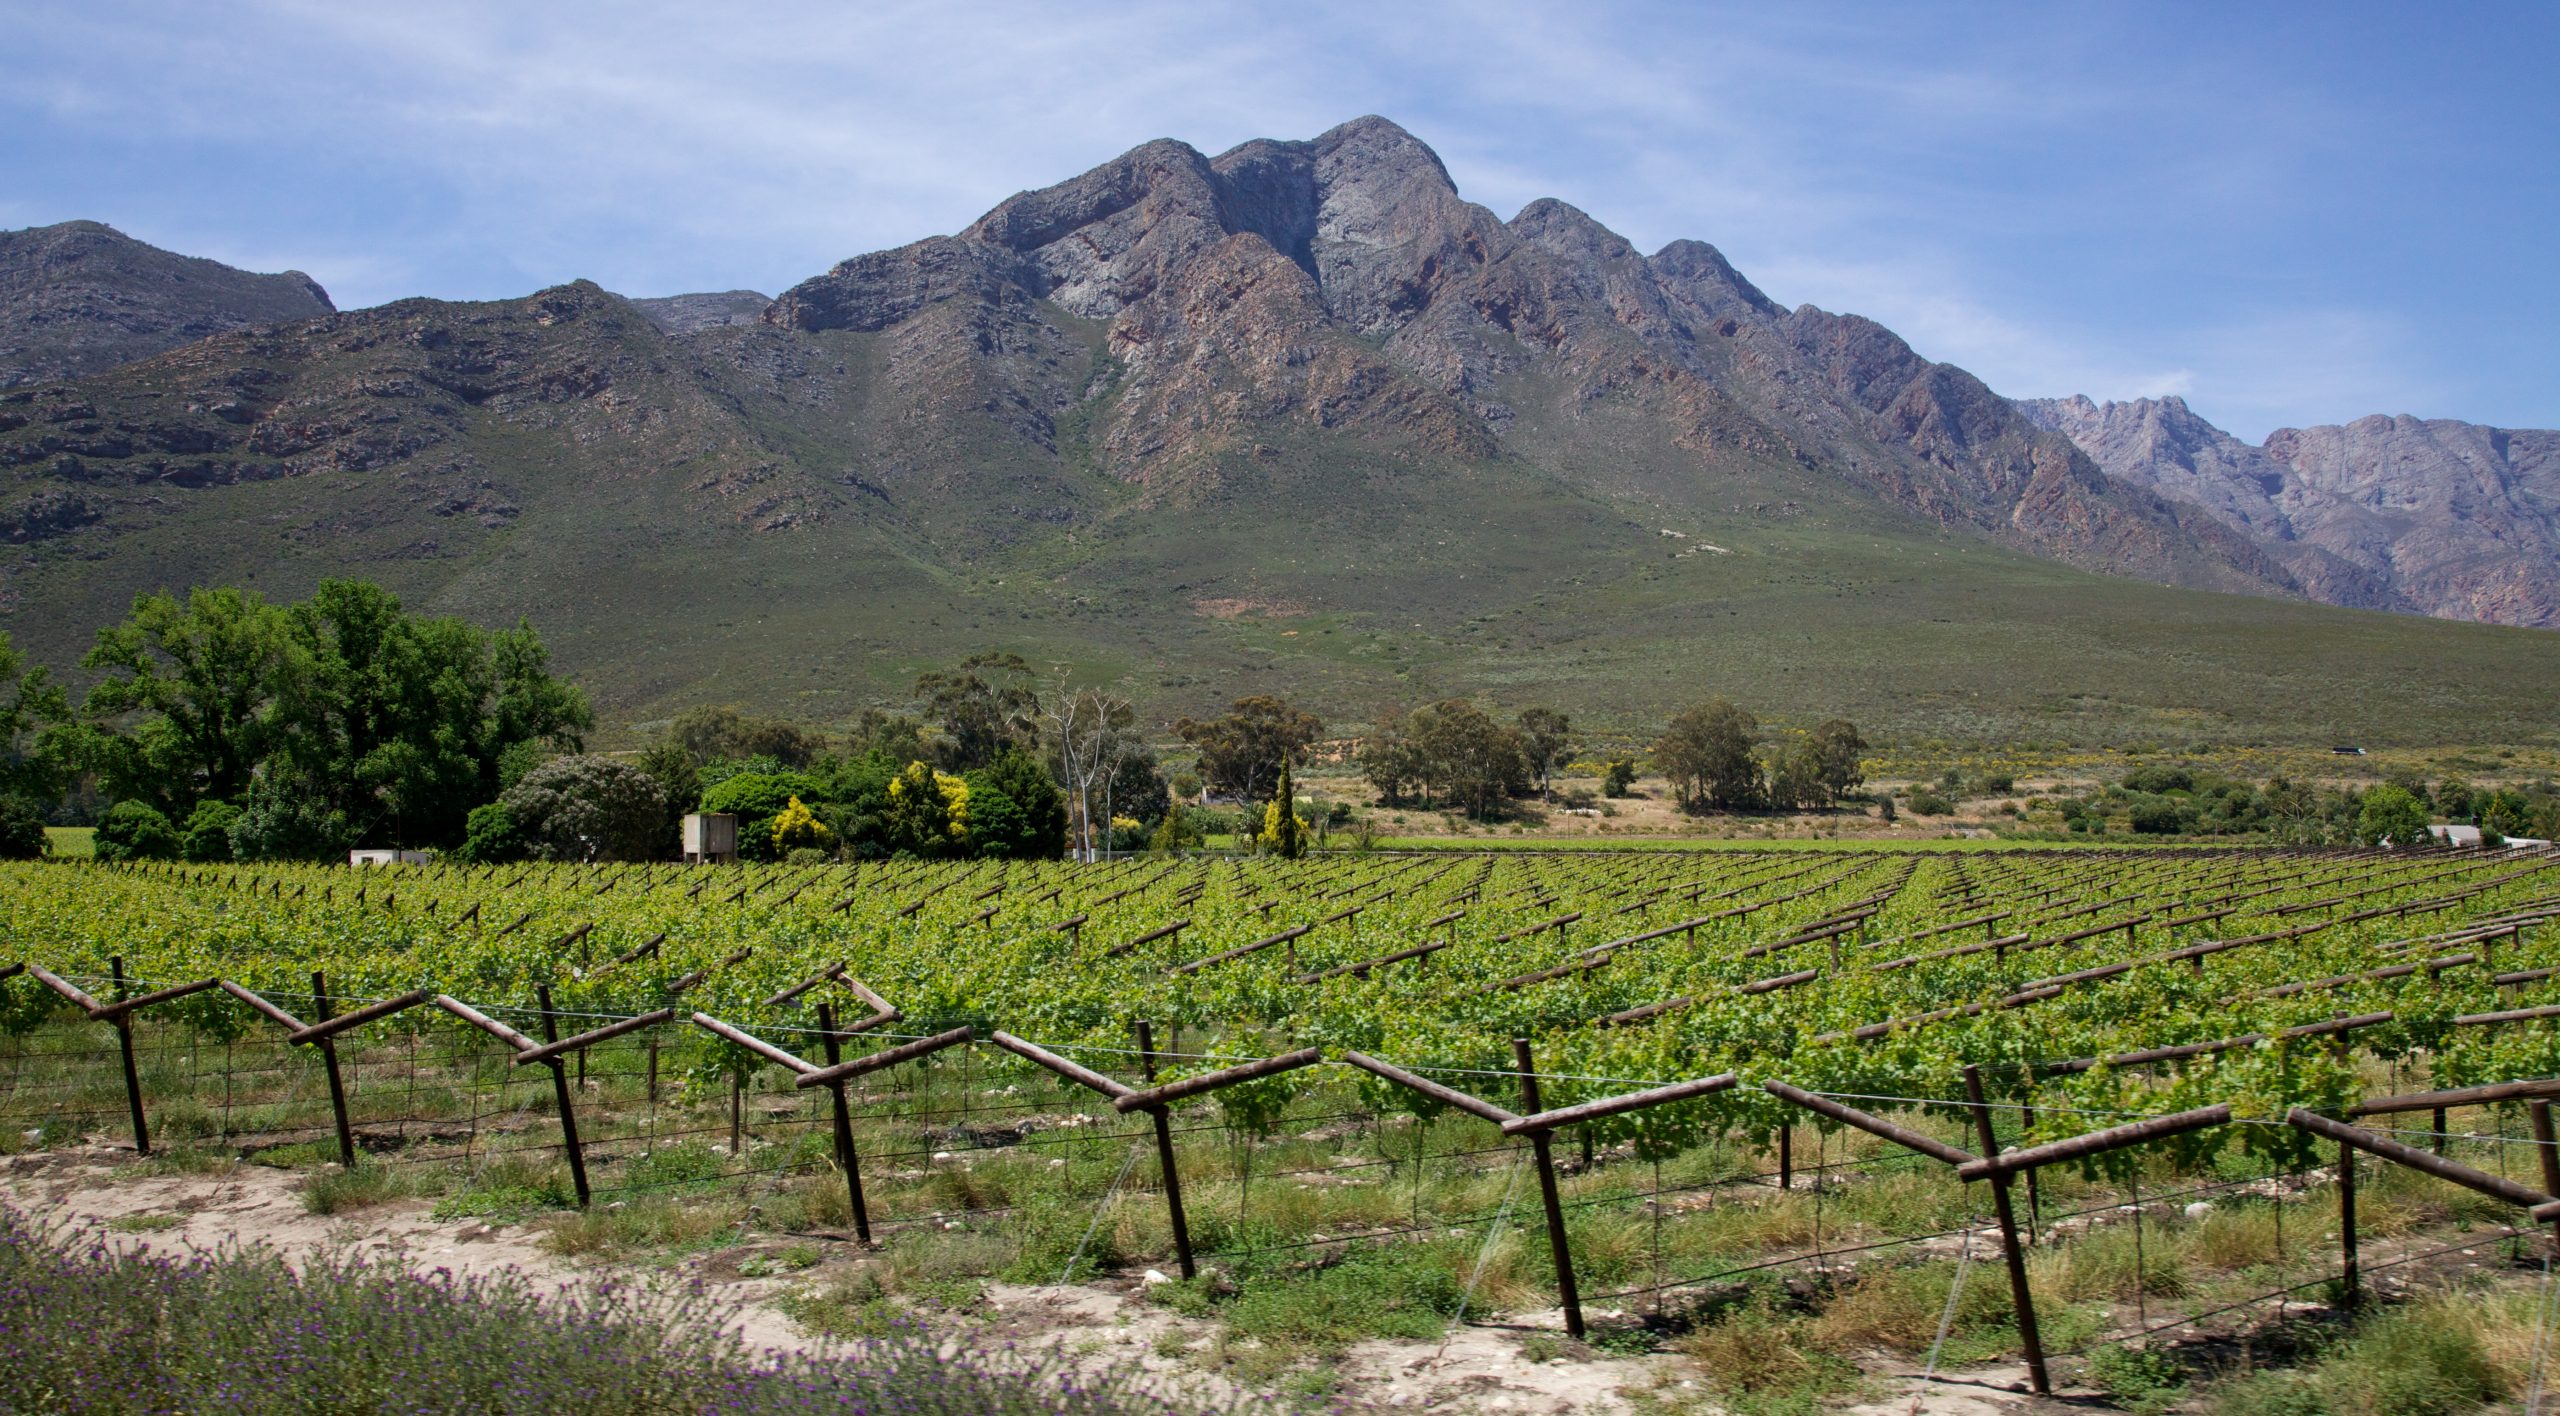 A view of the South African wine country. Copyright: David Brossard/Flickr.